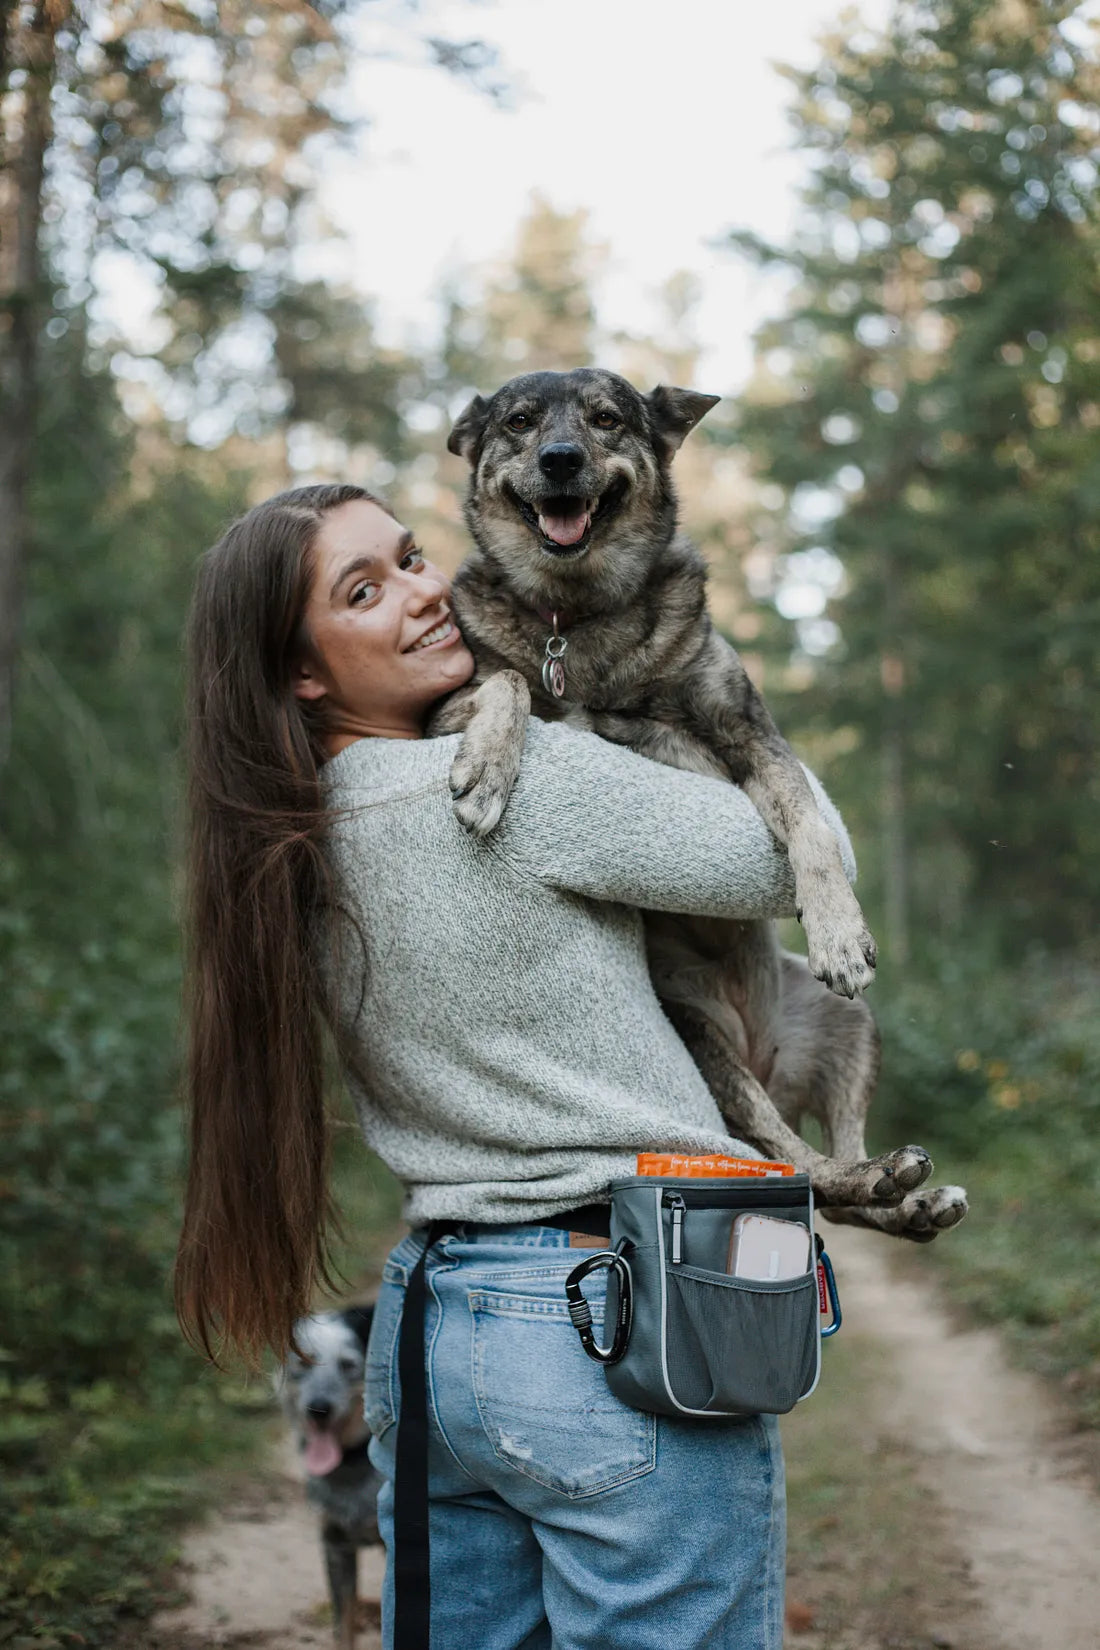 Pets and Mental Wellness: Lylalee Soley Of Smarten Up Pup On How to Maximize the Mental Health Benefits of Having a Pet